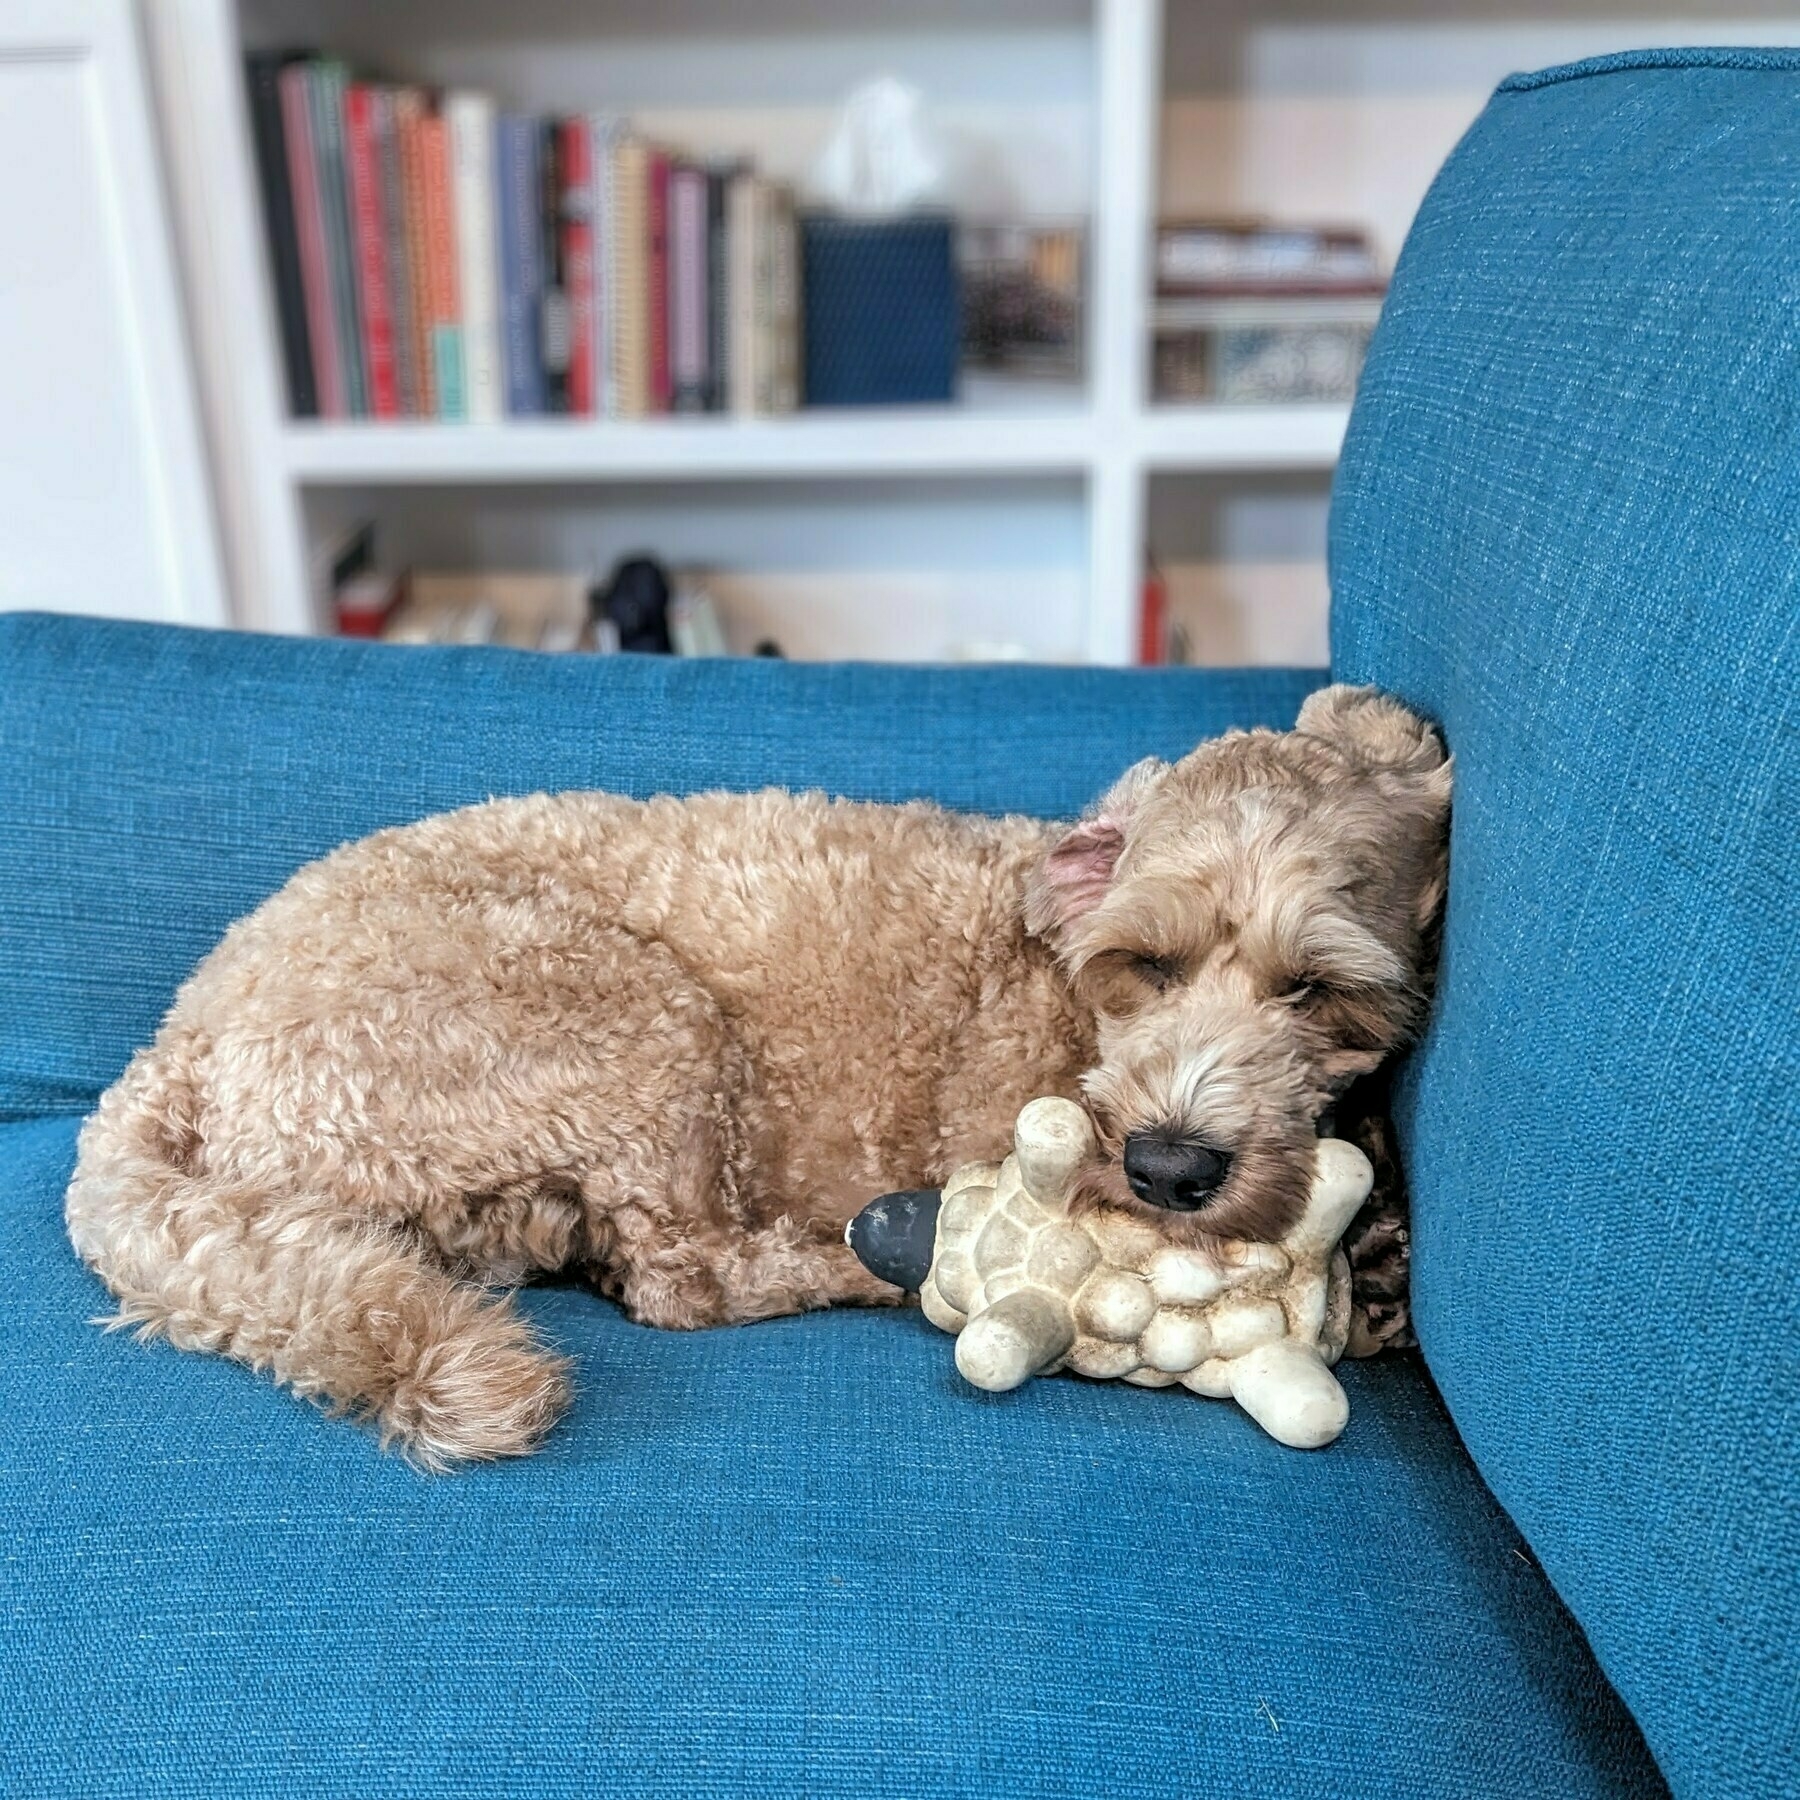 Mini Goldendoodle dog asleep on a vibrant blue couch with a toy lamb it its mouth